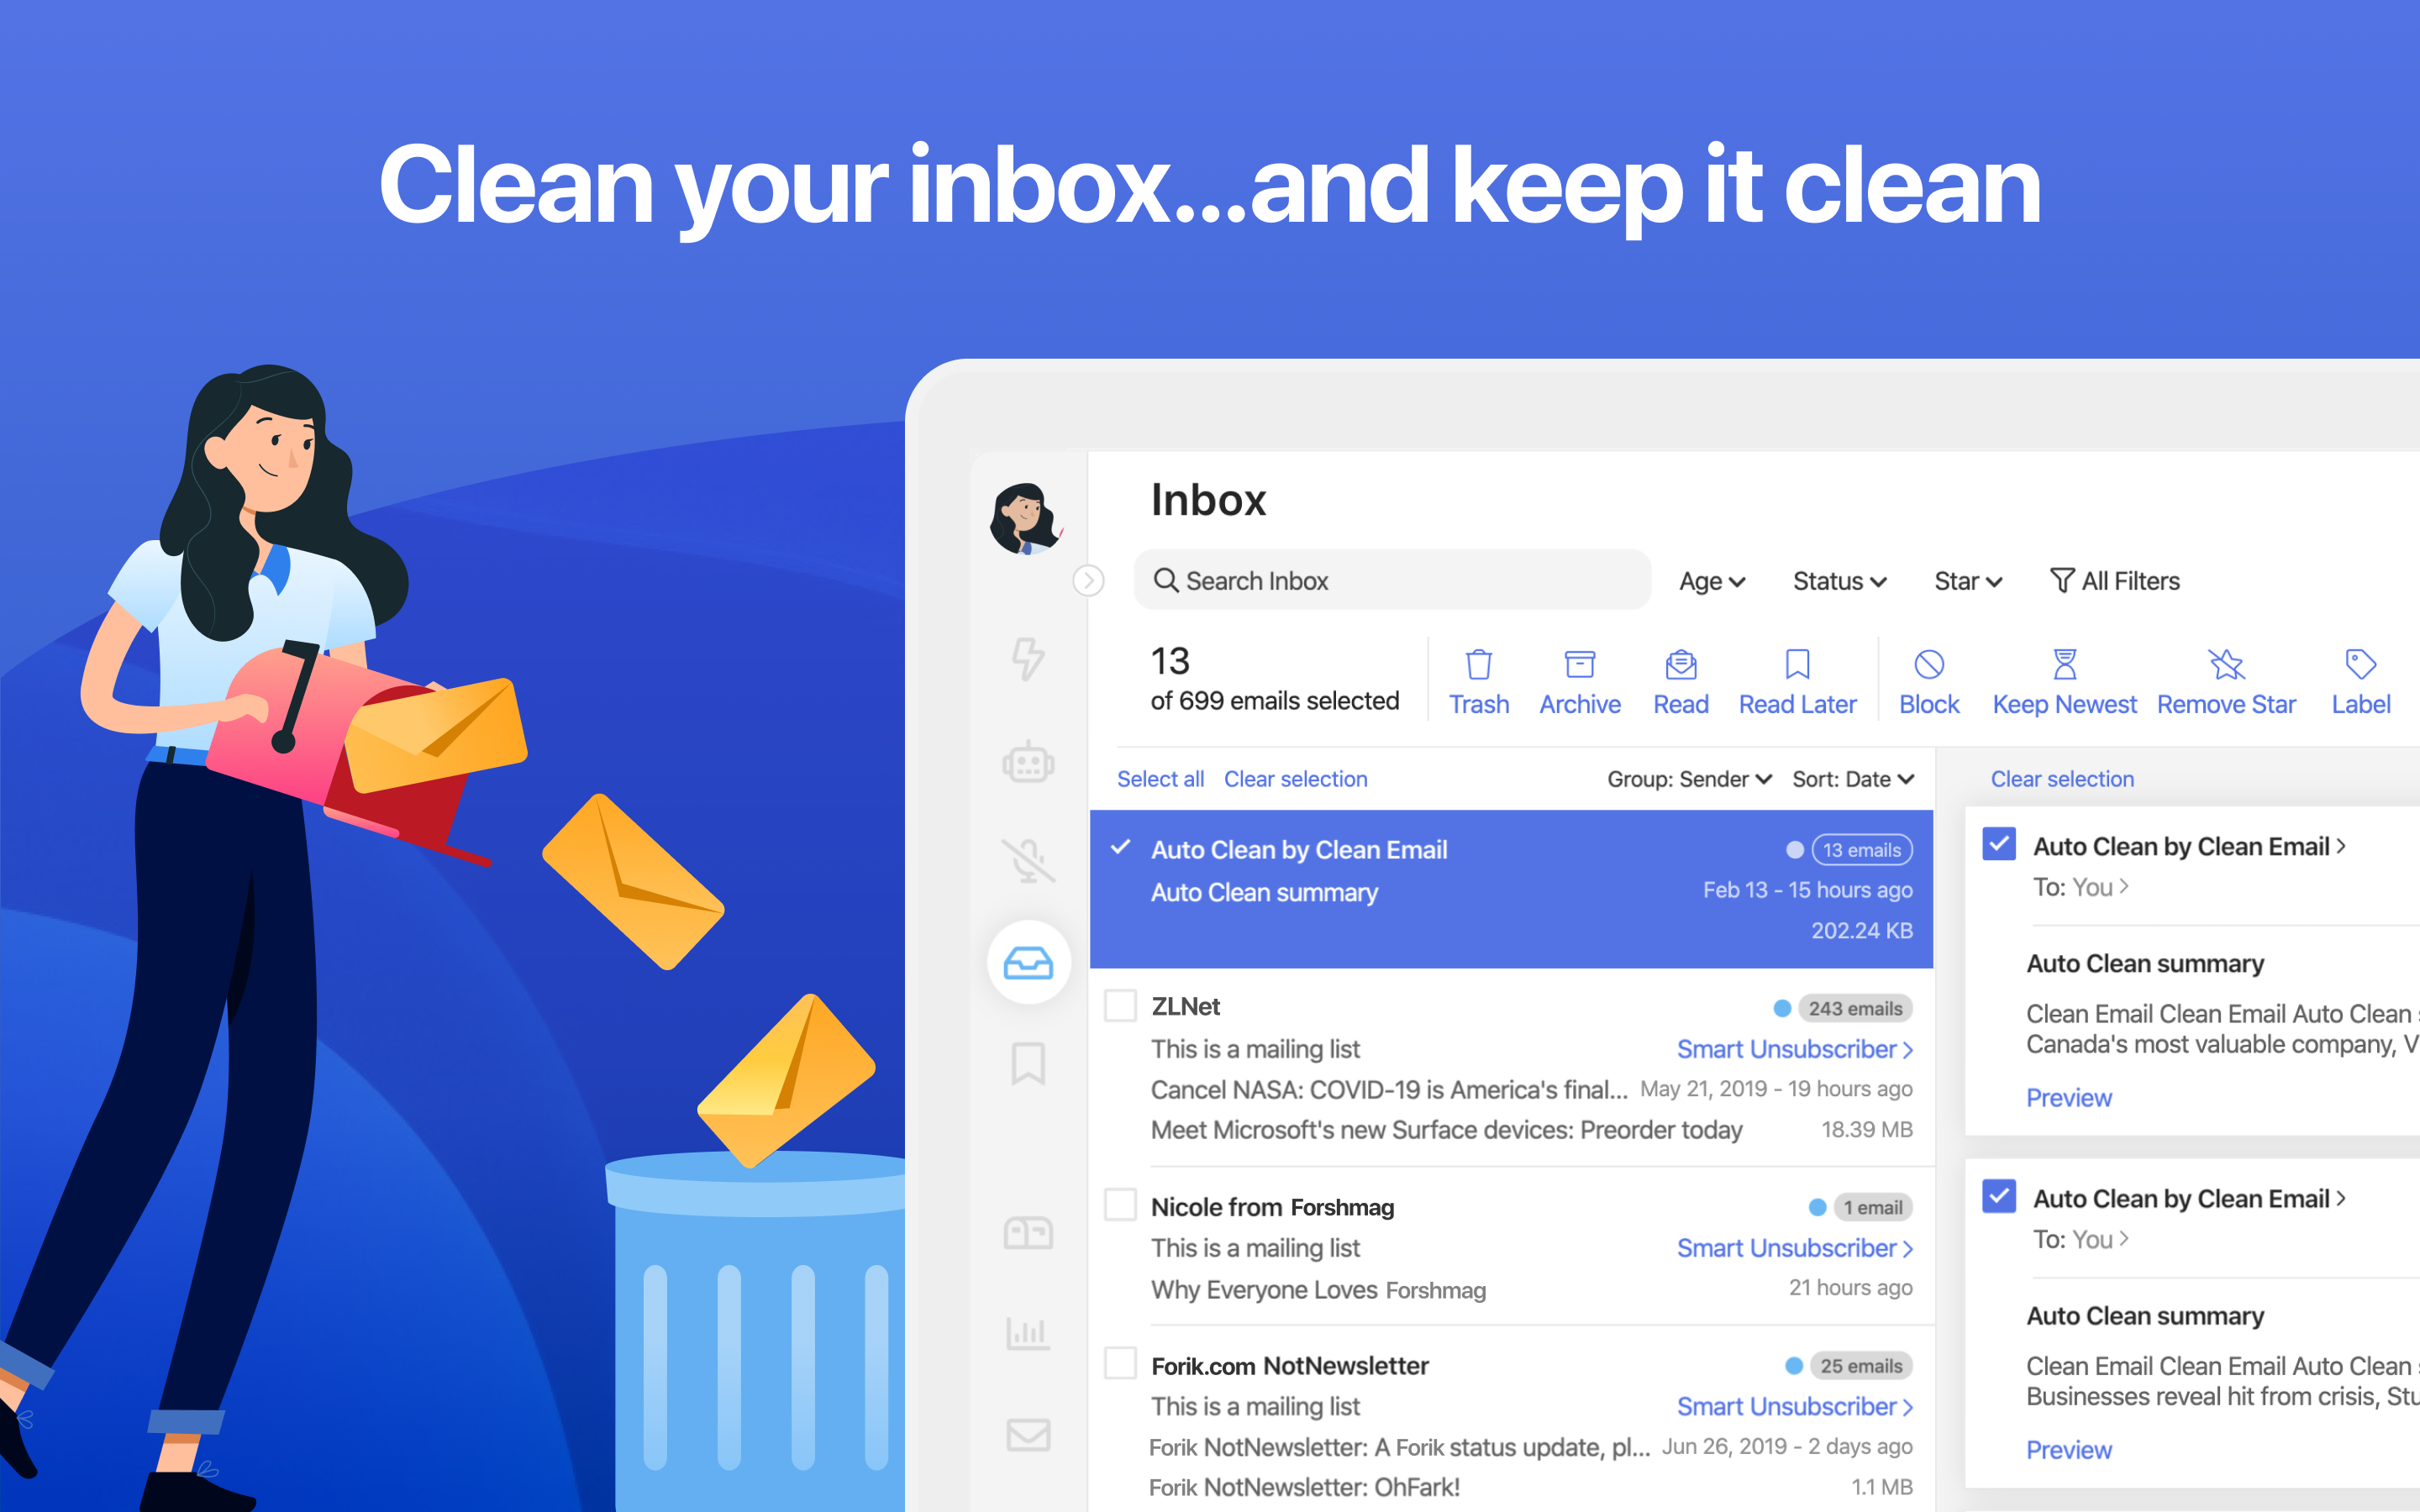 Clean your inbox...and keep it clean